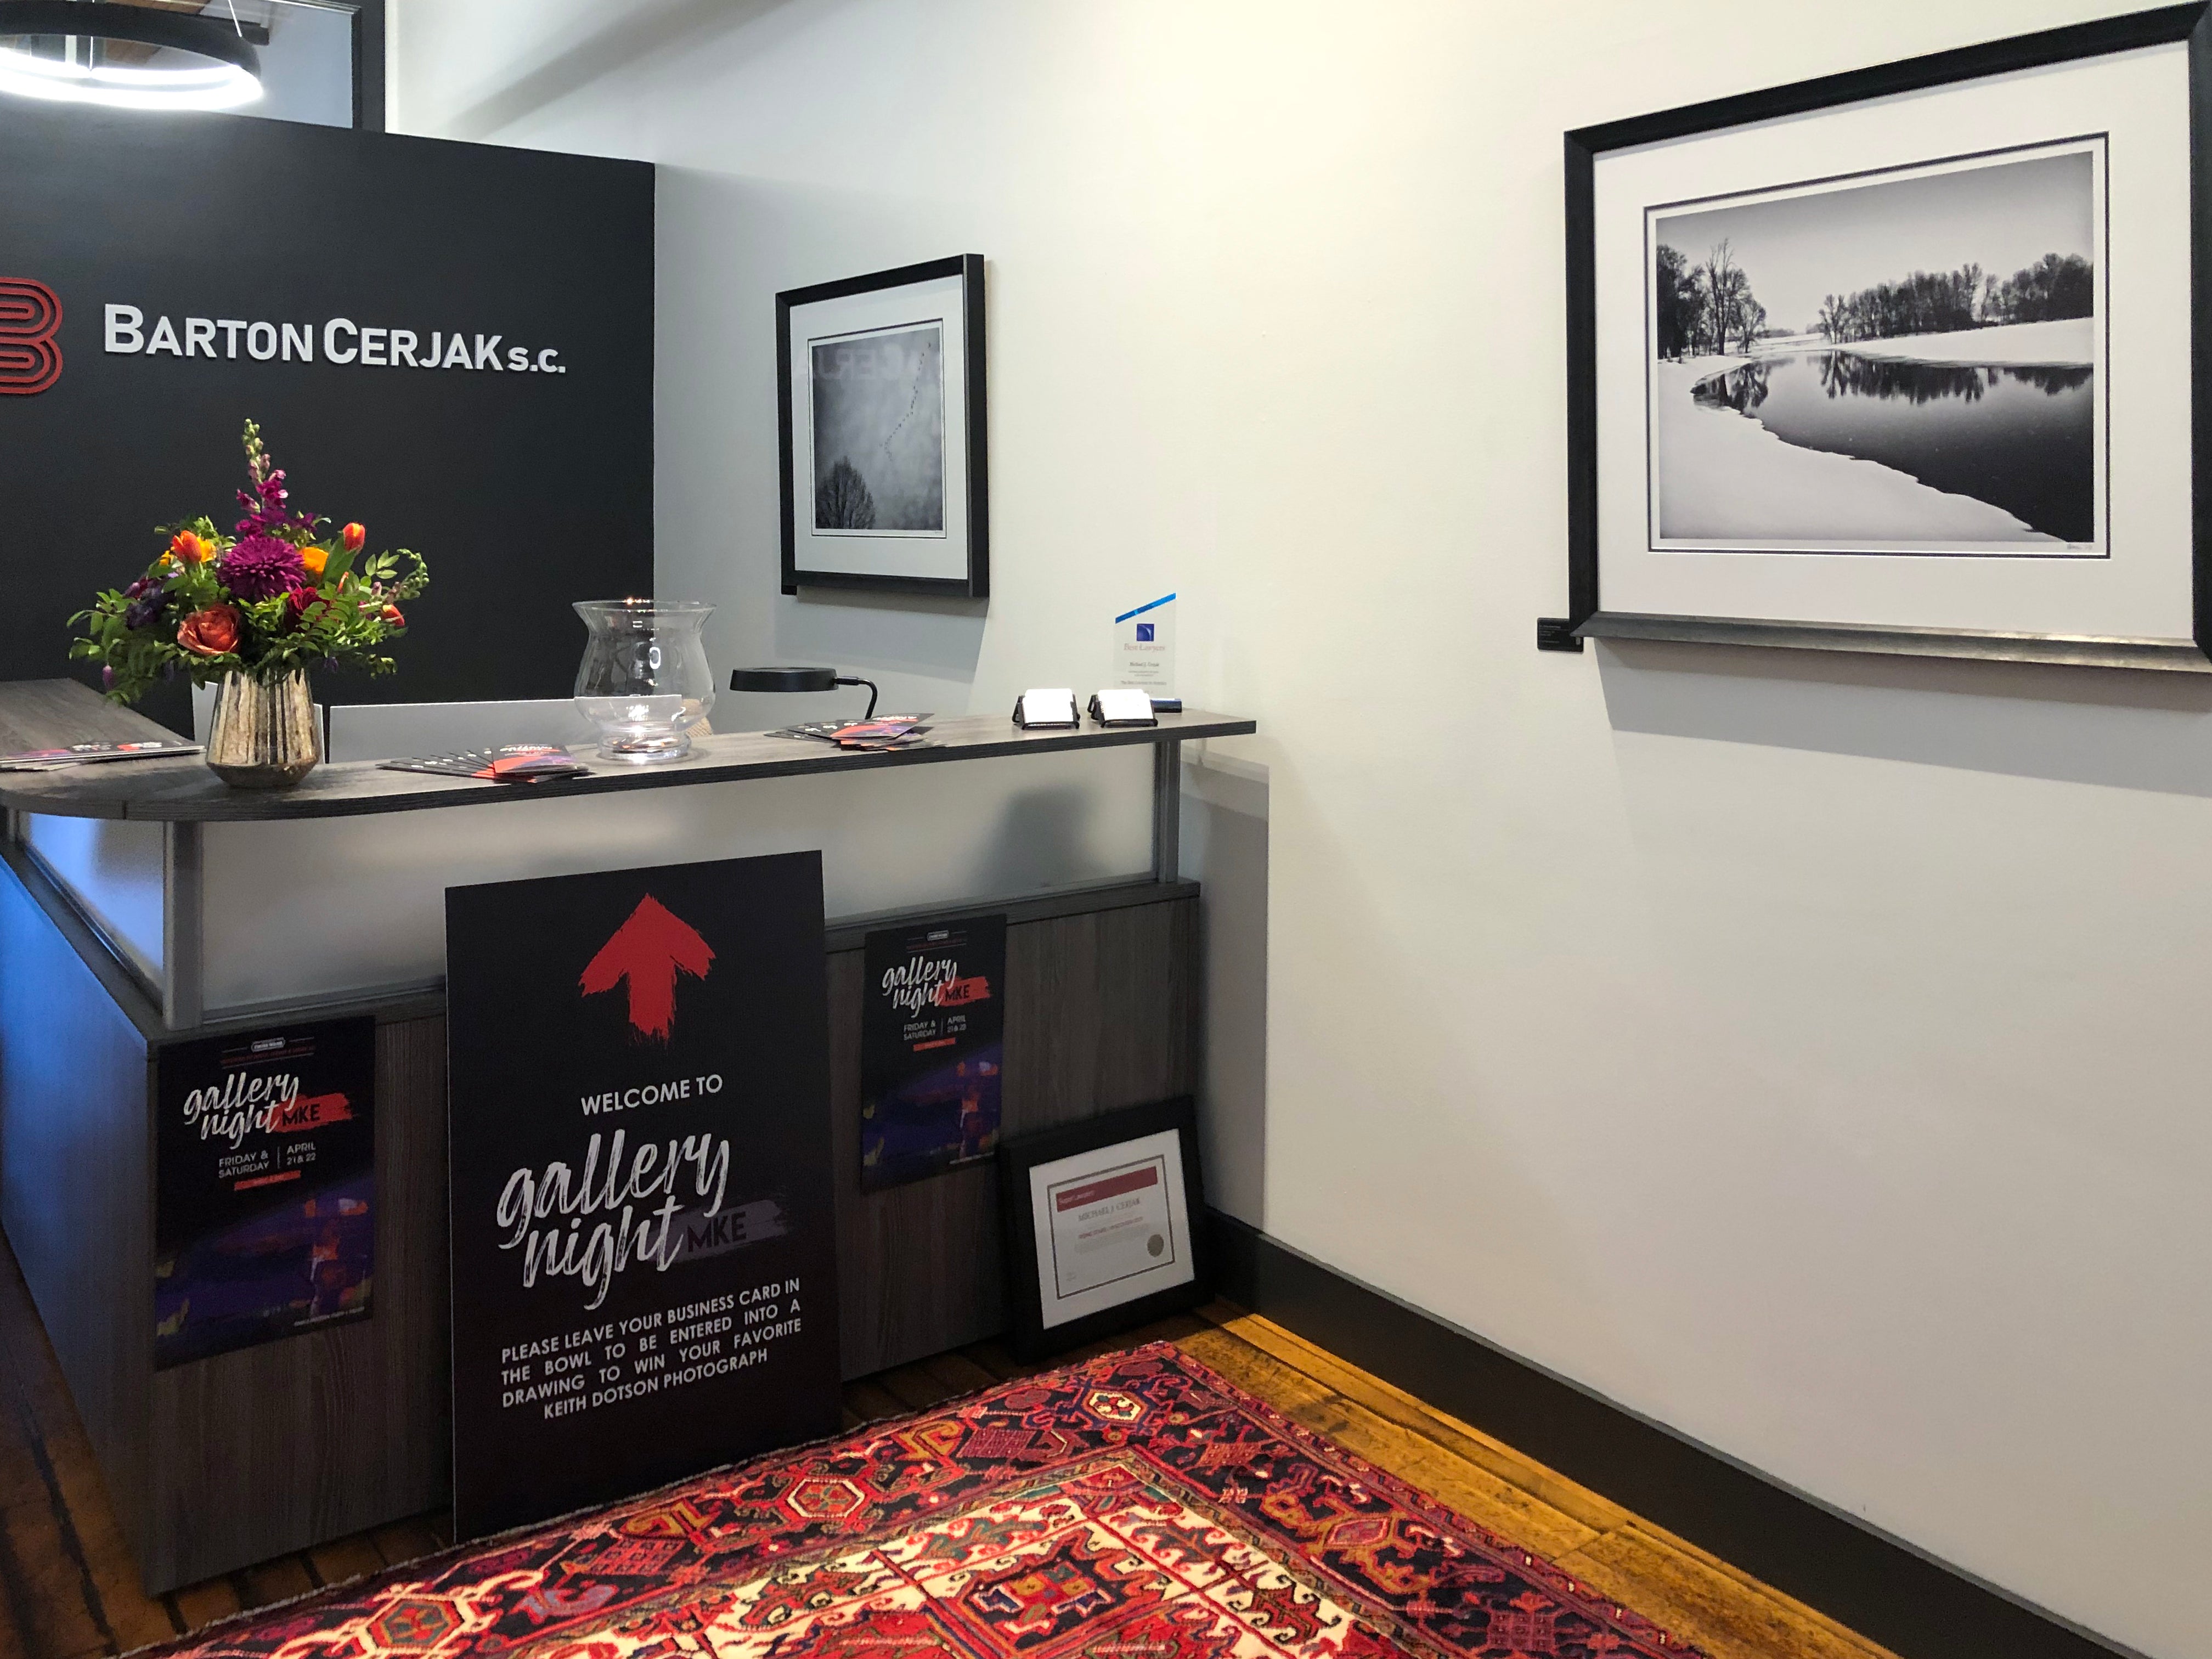 Reception area of Milwaukee law firm Barton Cerjak S.C. featuring two framed black and white photographs by Keith Dotson